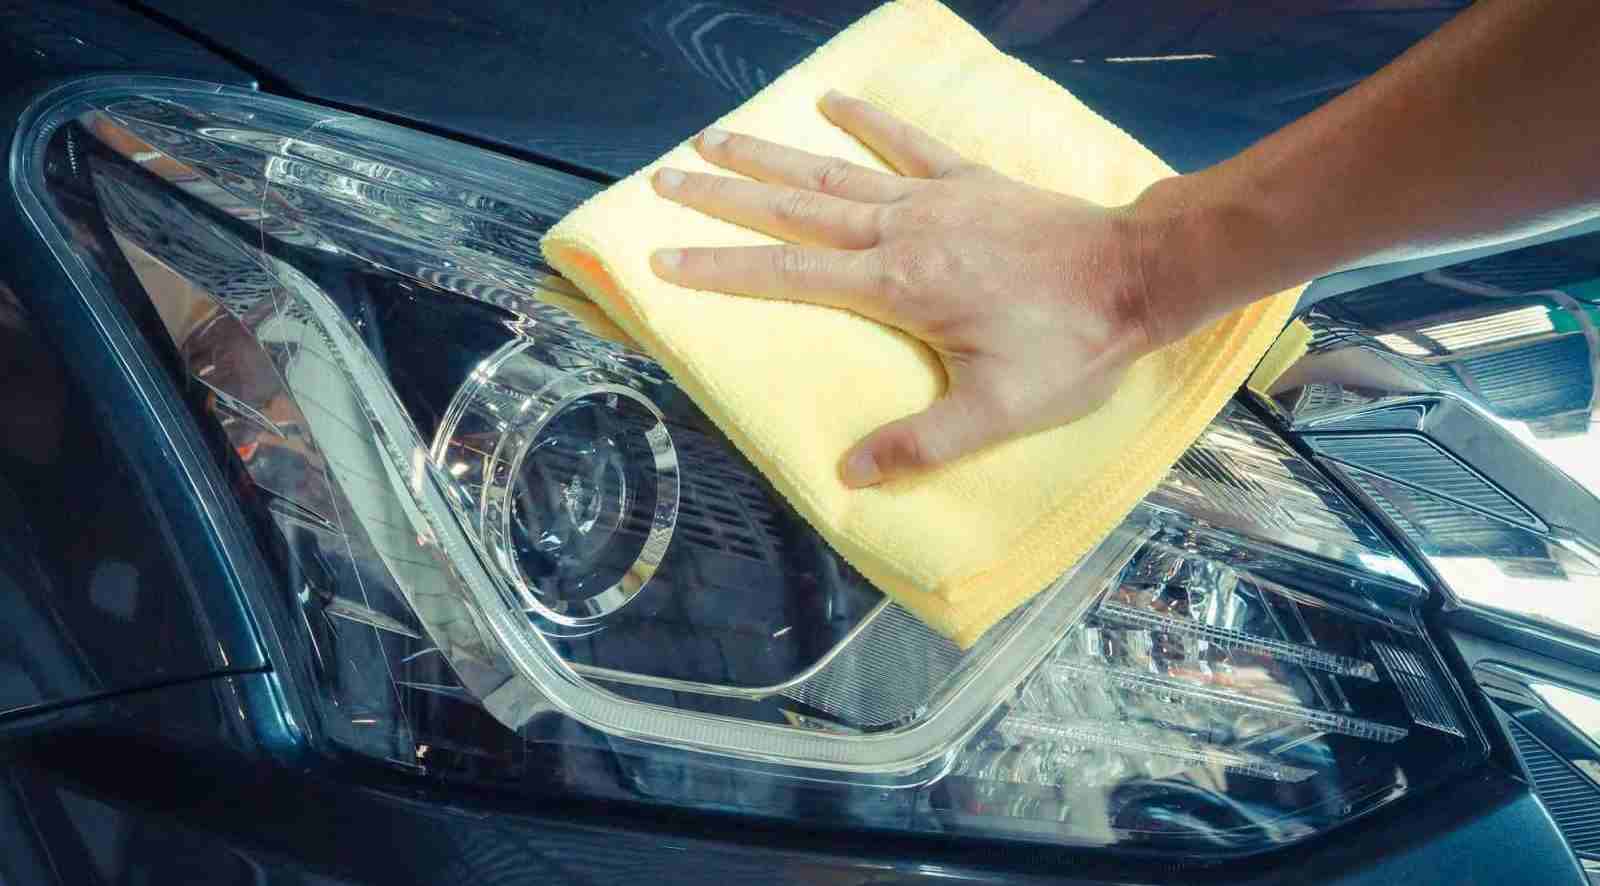 How to clean plastic headlights with household items